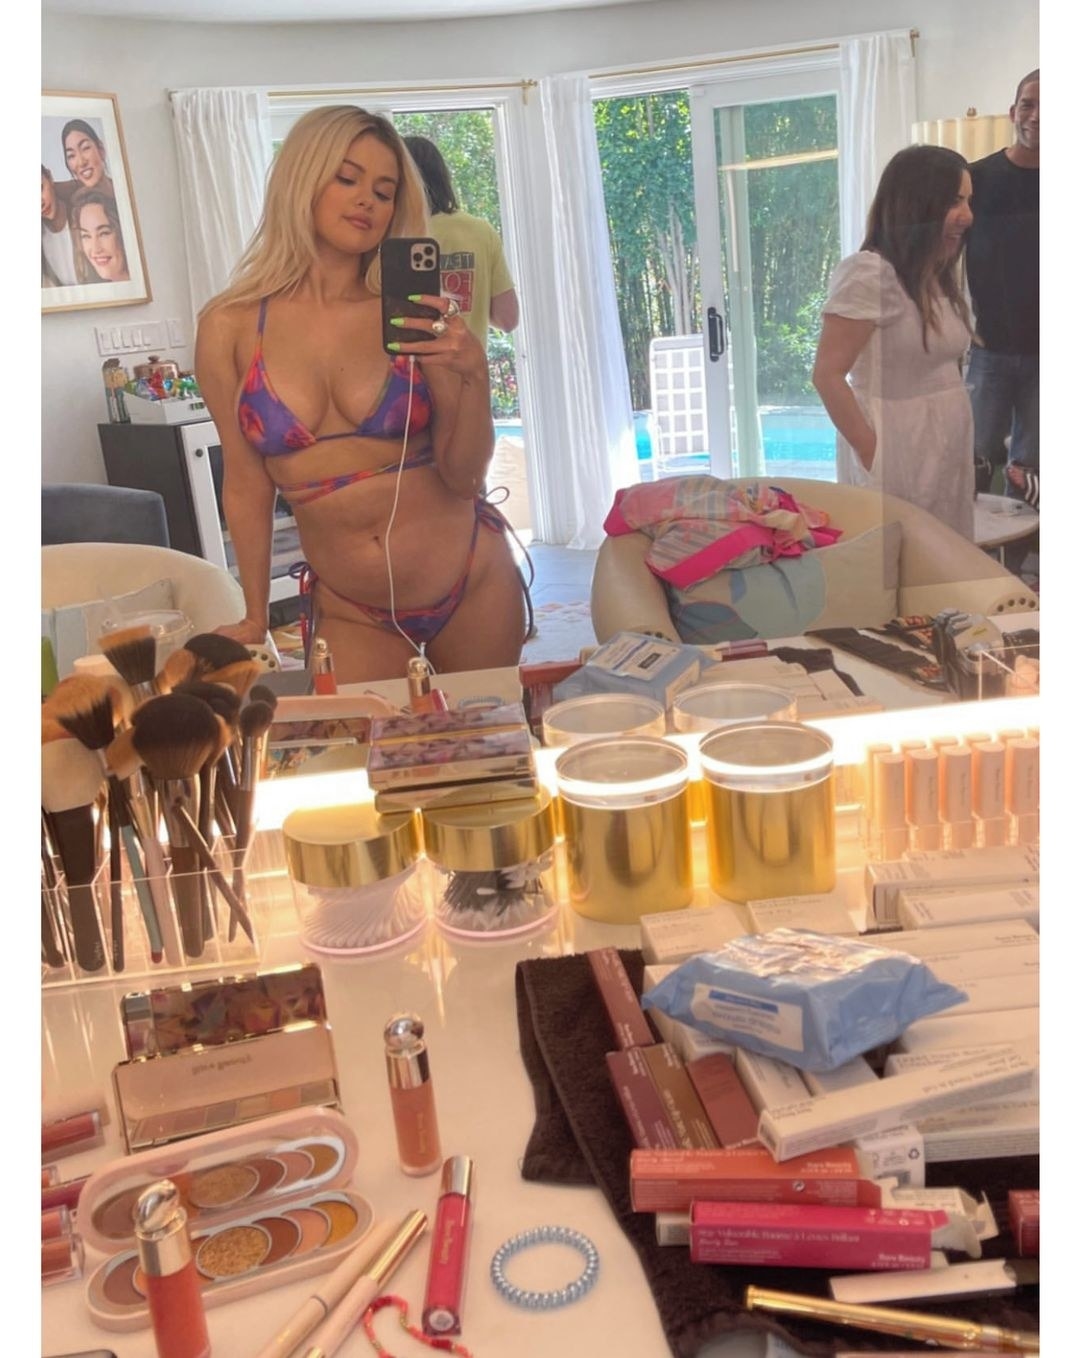 Selena taking a selfie at a mirror, wearing a bathing suit, with a table with makeup and applicators in the foreground